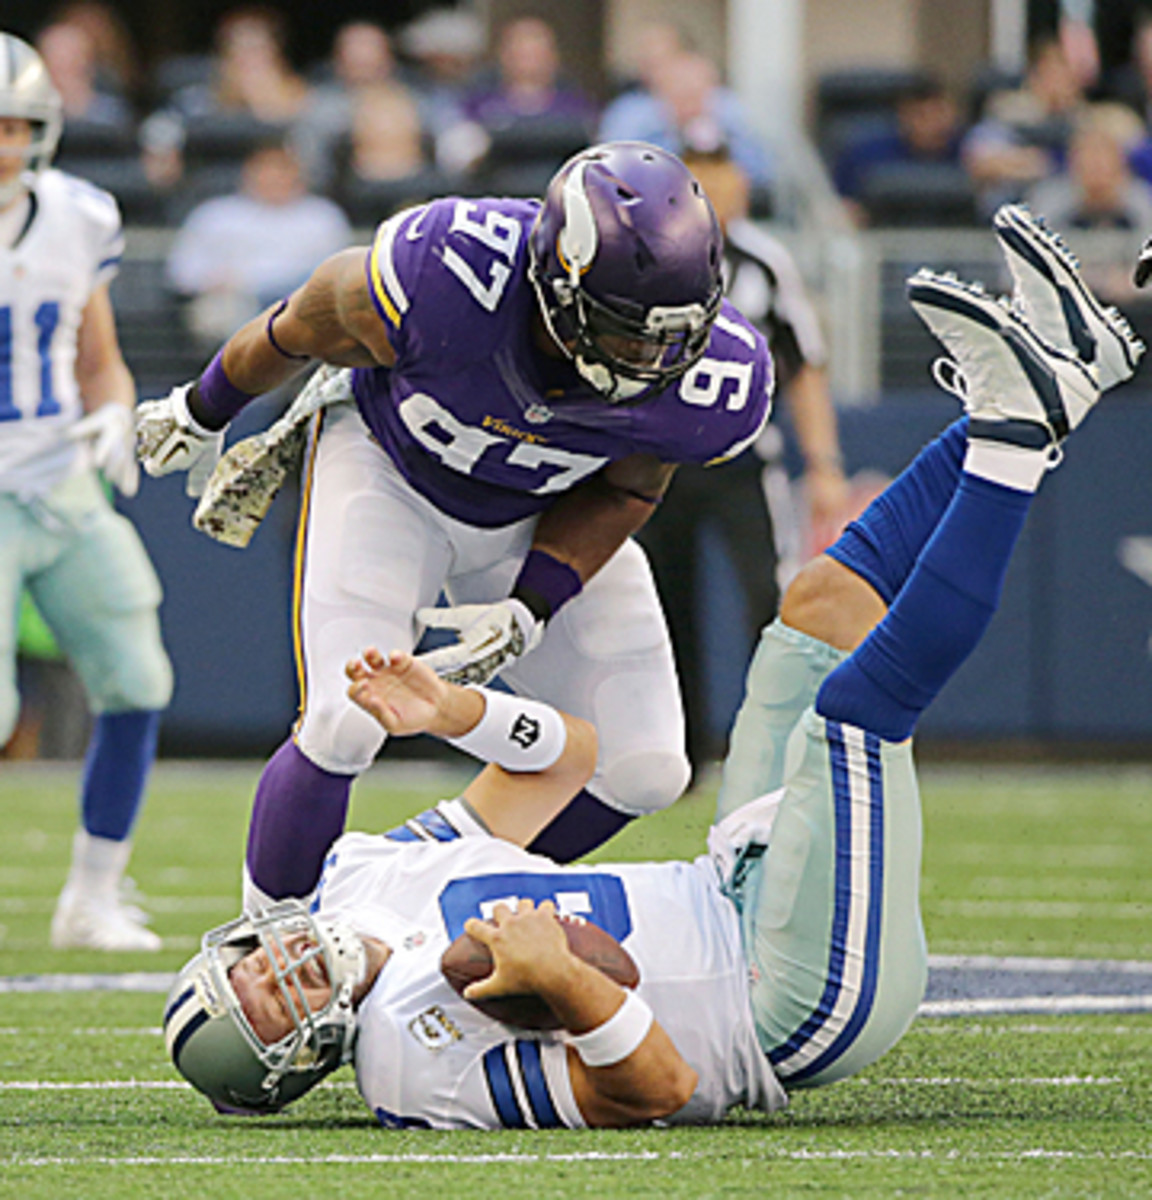 Quarterbacks will see a lot more of Everson Griffen this fall. (Tom Dahlin/Getty Images)